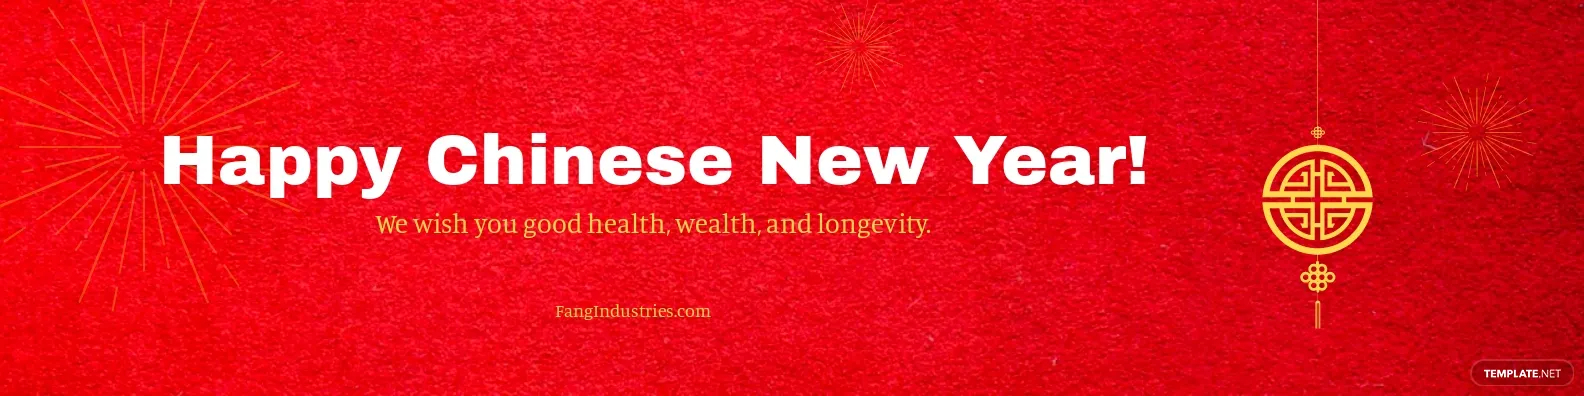 chinese-new-year-linkedin-banner-template